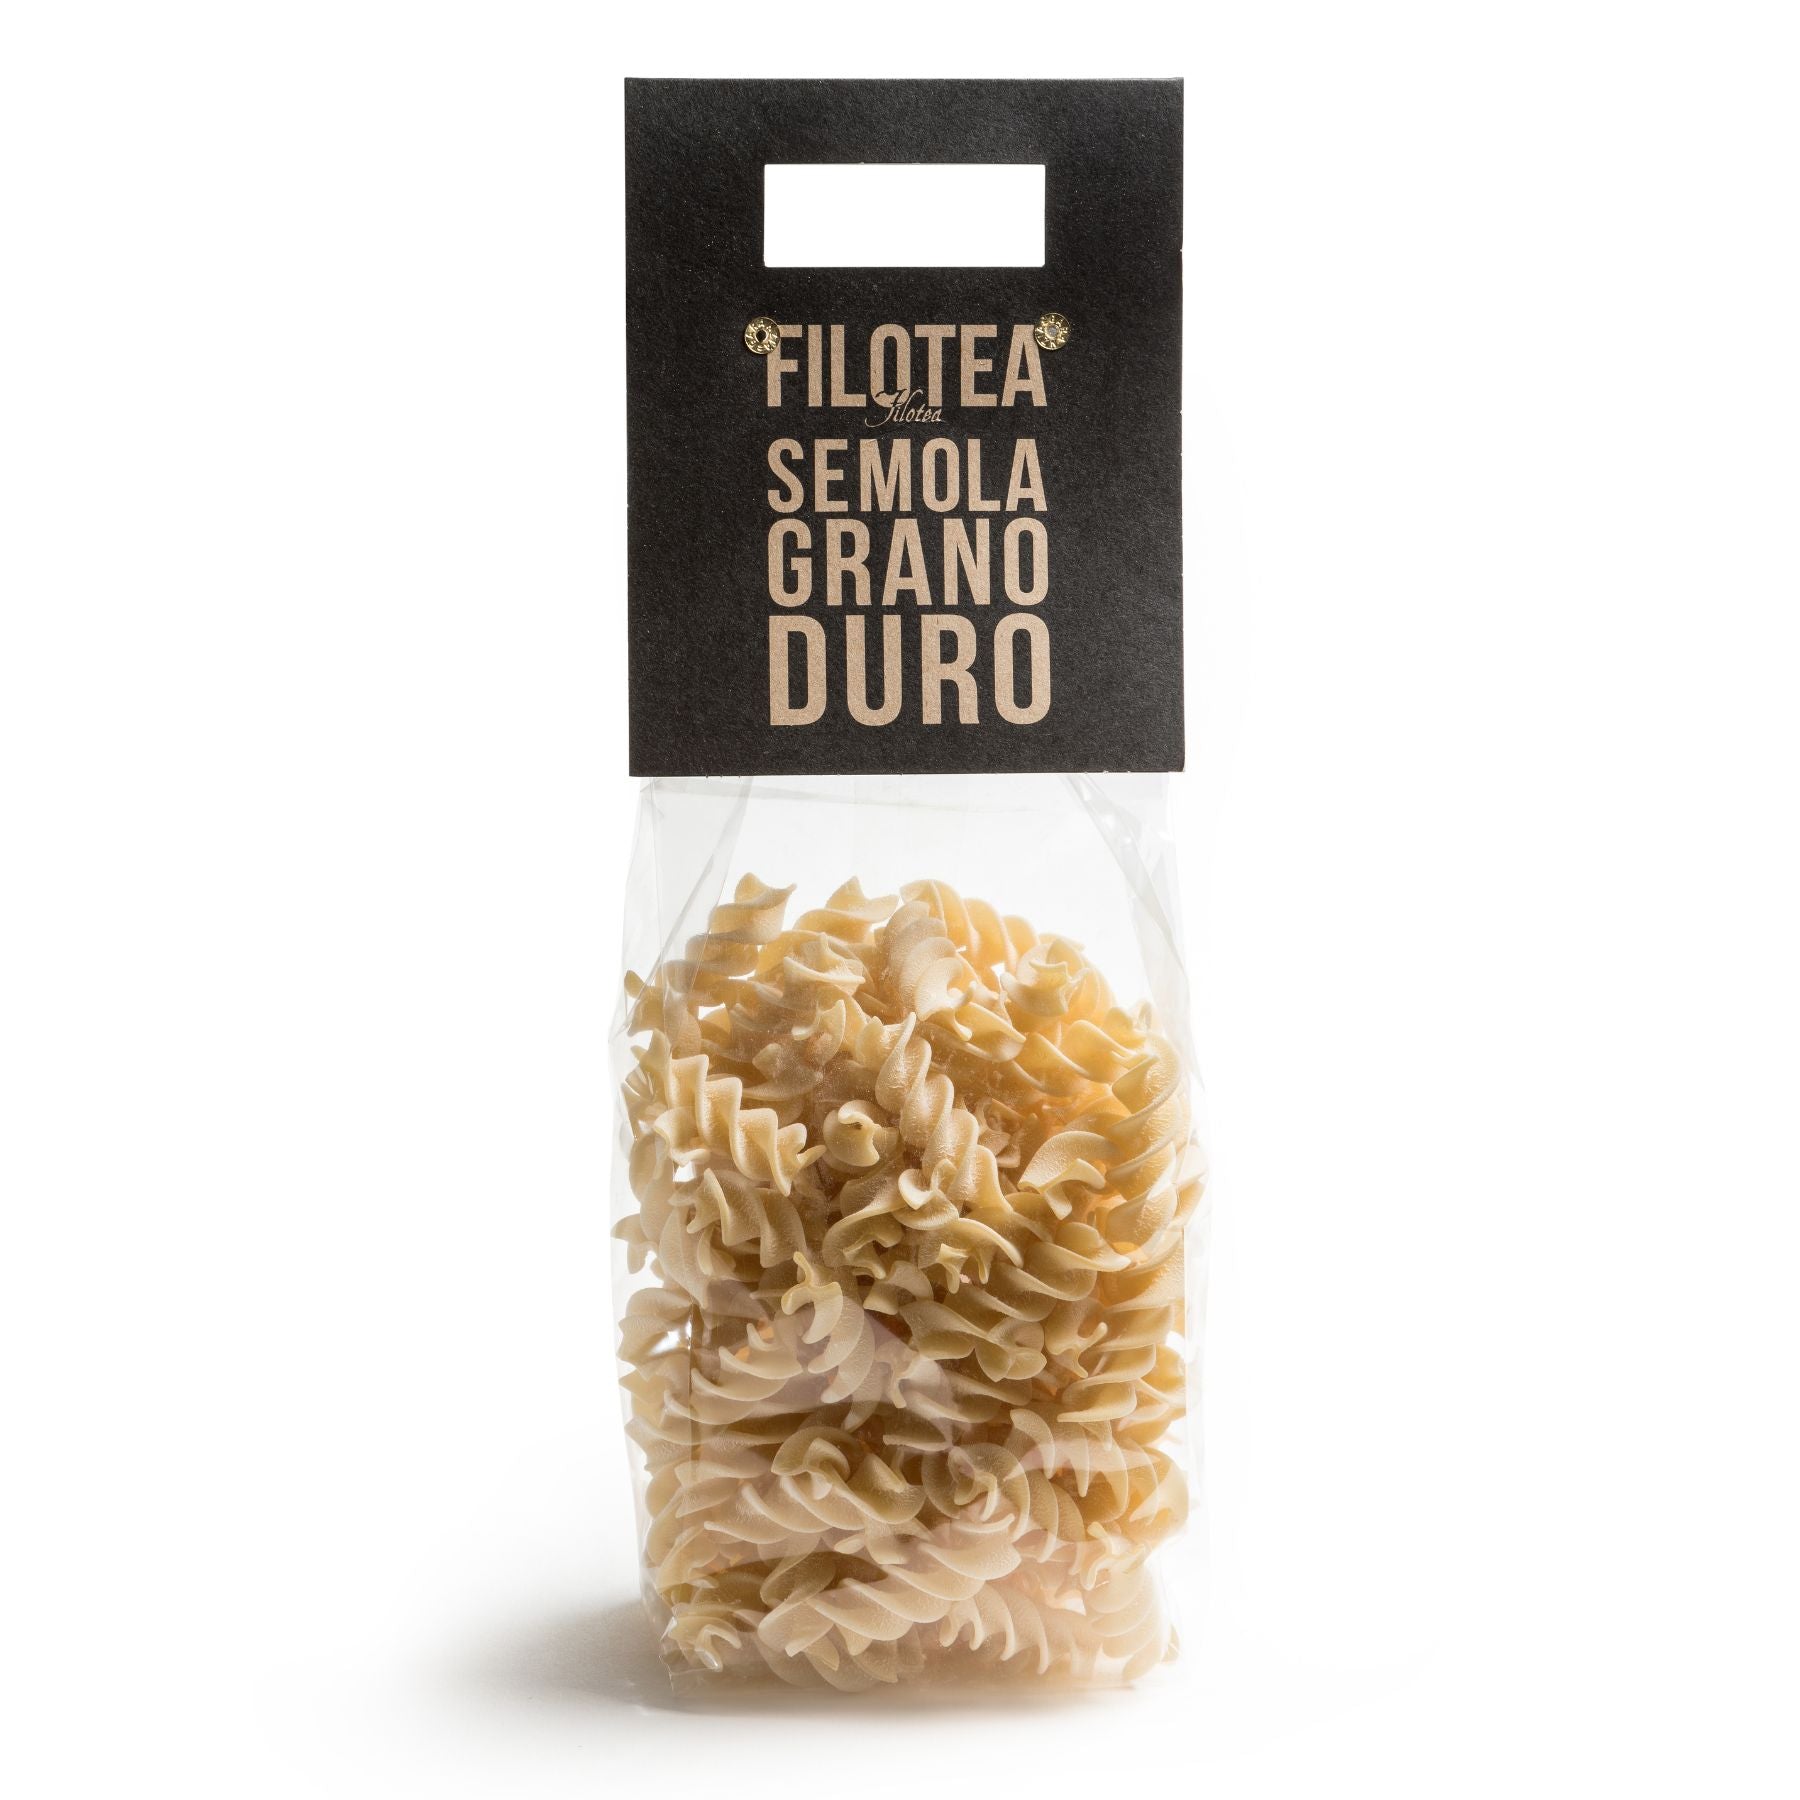 Filotea Fusilloni Durum Wheat Semolina Pasta 500g | Imported and distributed in the UK by Just Gourmet Foods